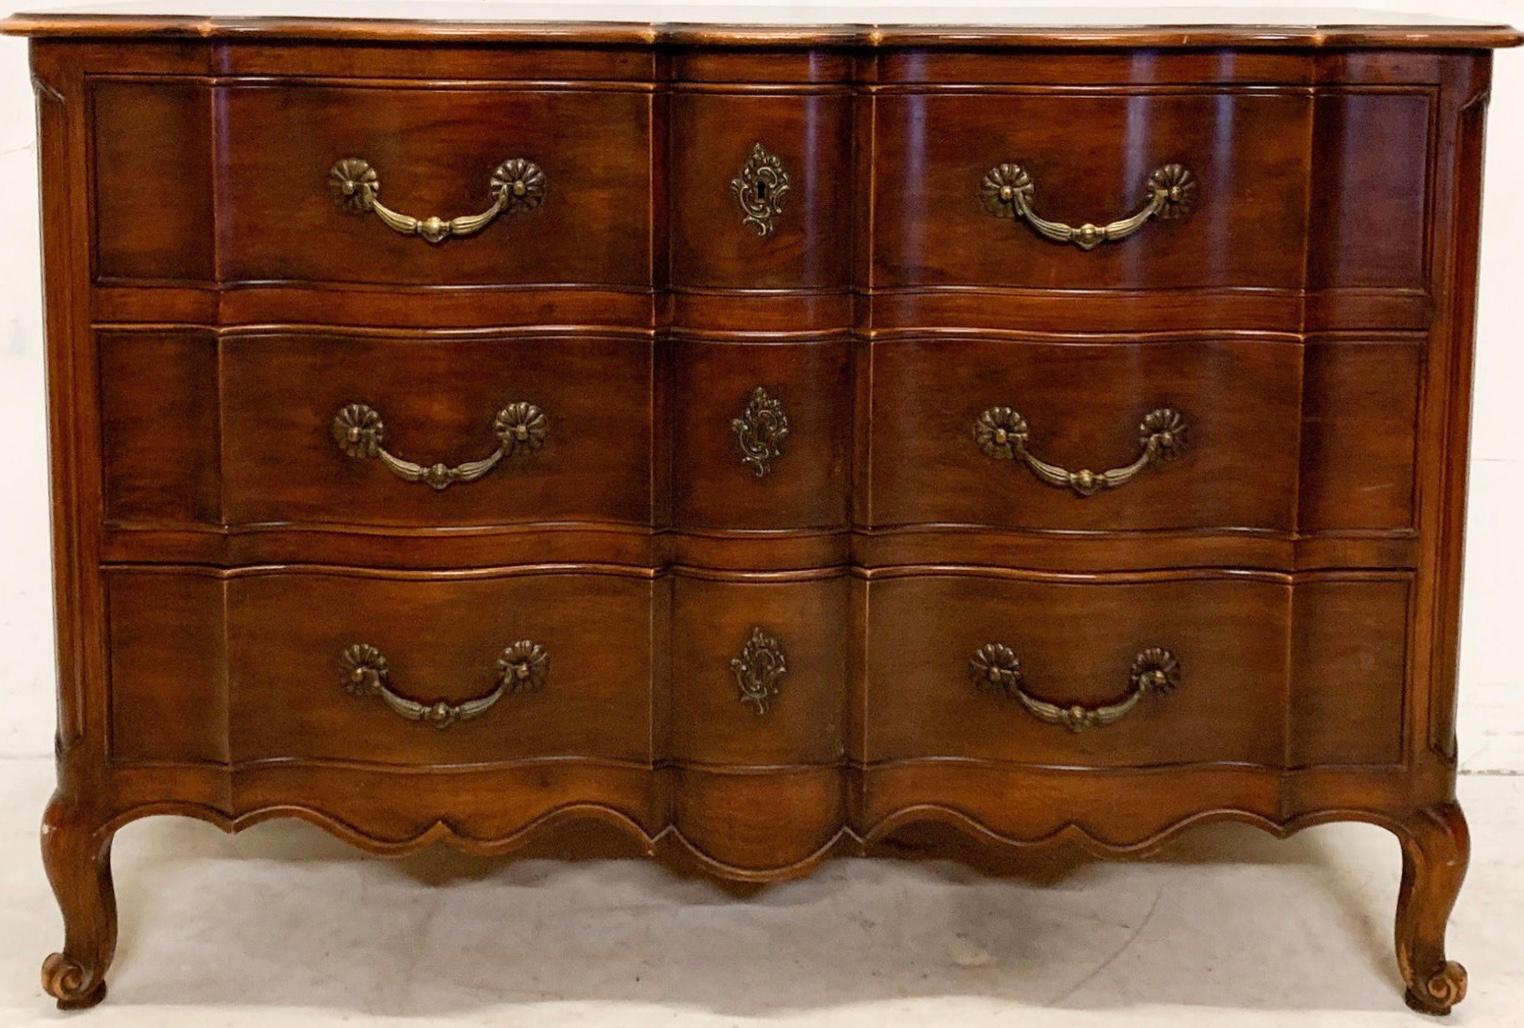 This is a versatile piece that would work from foyer to bed to bath. It is a carved French Louis XIV style carved mahogany commode designed by John Widdicomb for Ralph Widdicomb. The quality and construction are impeccable with excellent attention